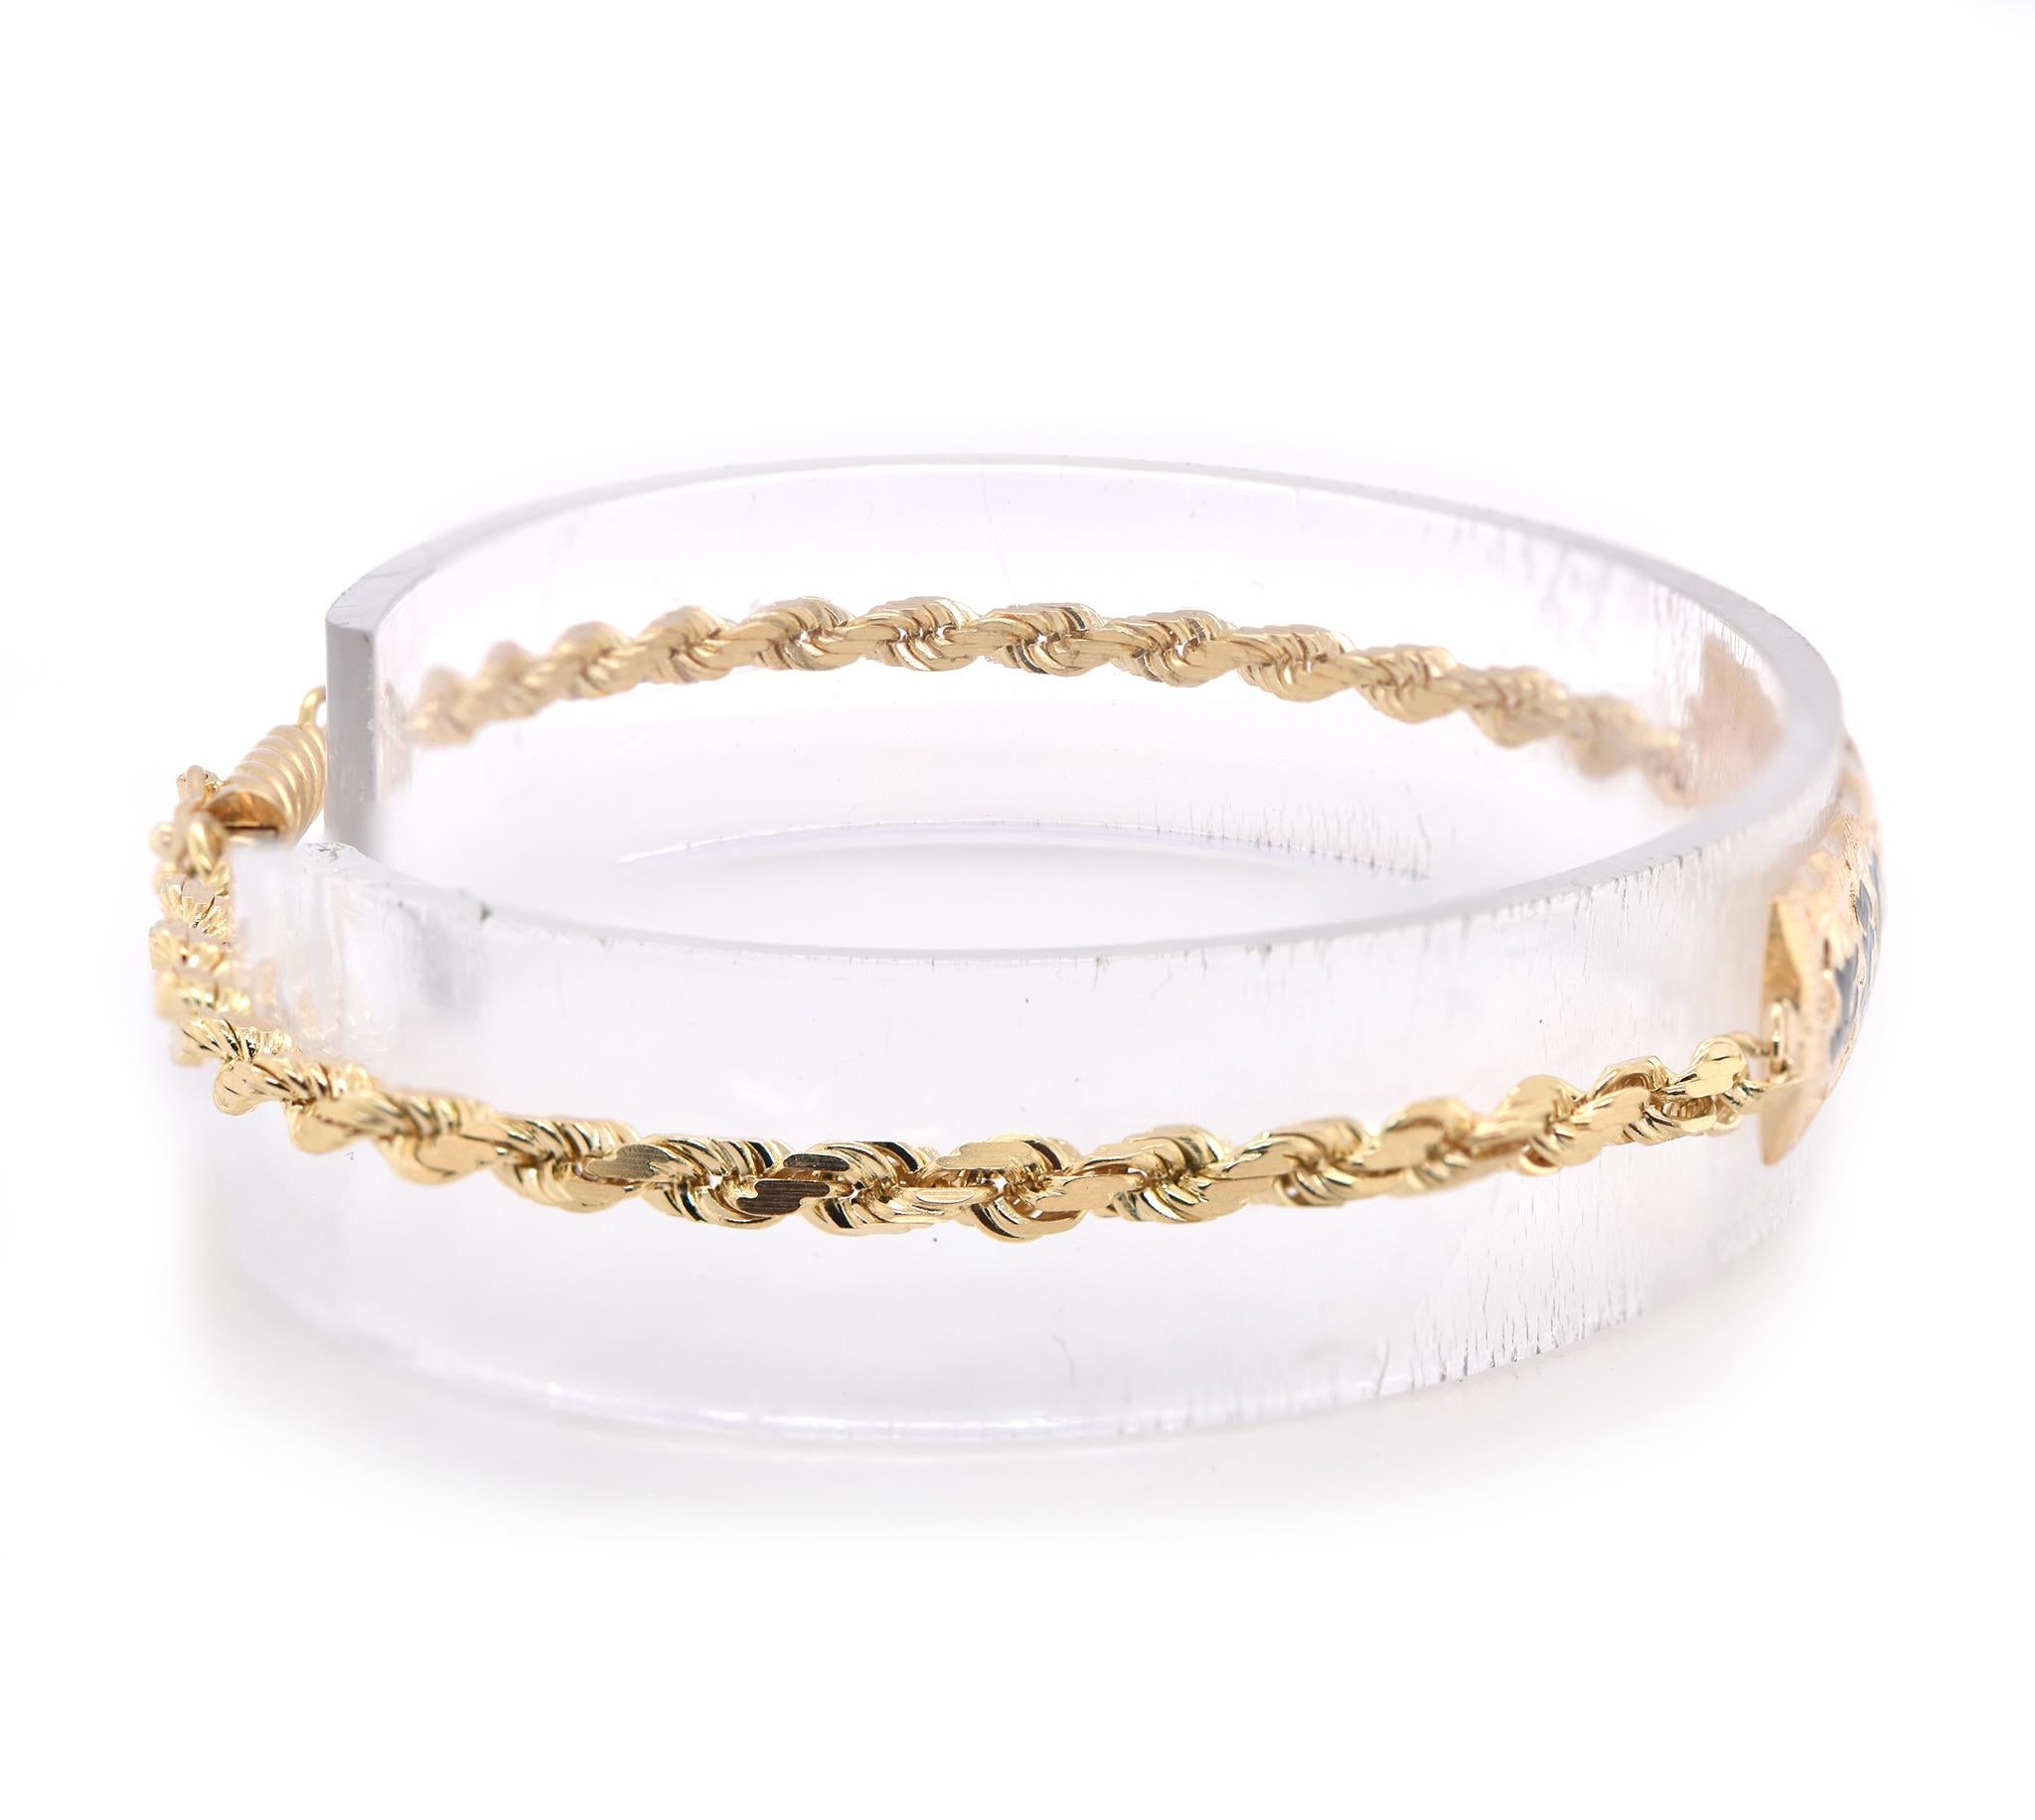 Designer: custom
Material: 14K yellow gold 
Dimensions: bracelet will fit up to a 7-inch wrist
Weight: 7.03 grams
